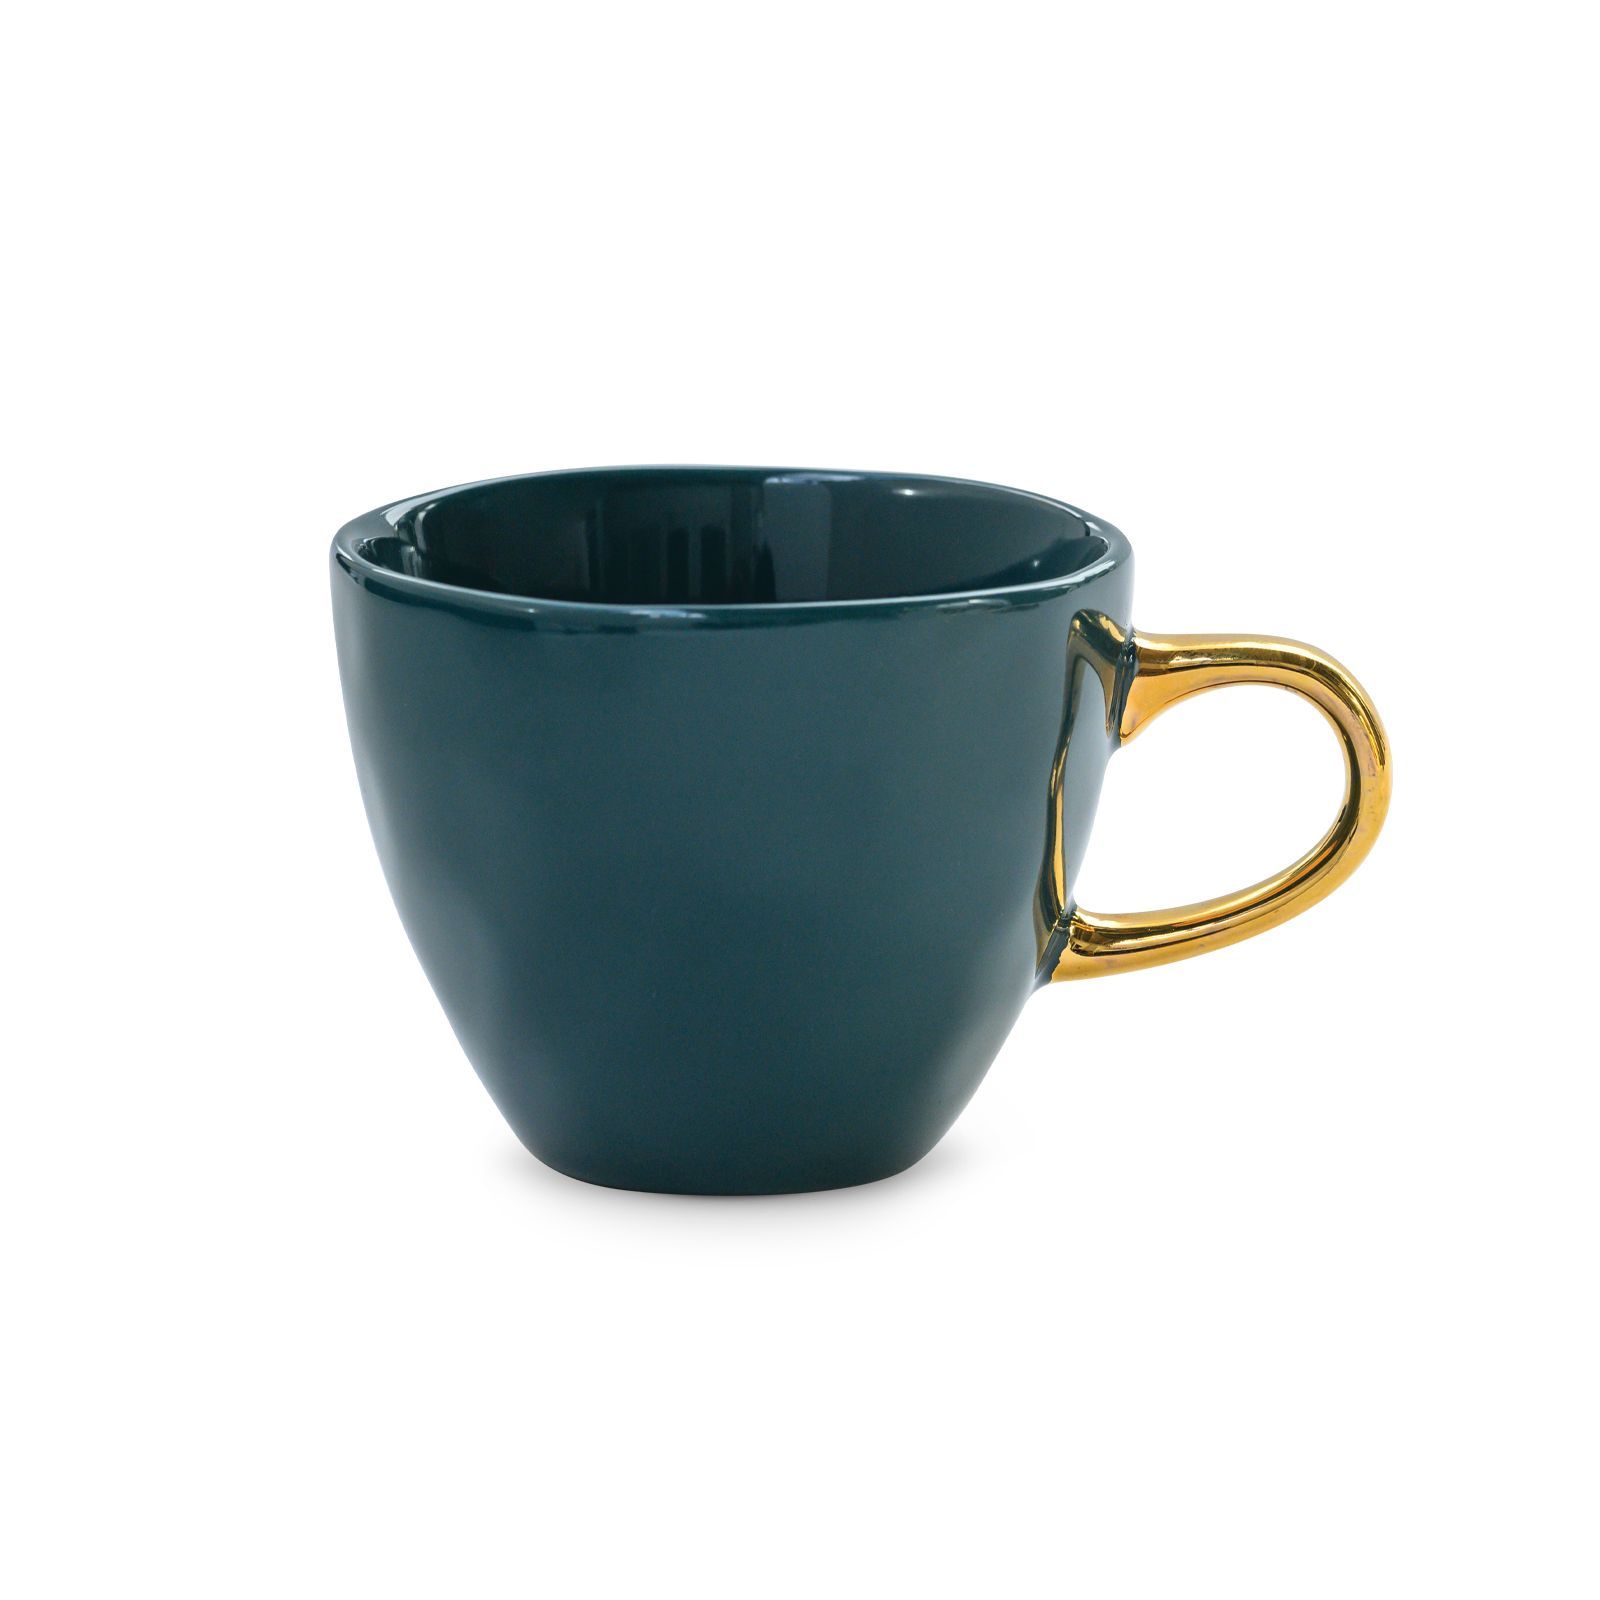 Unc Good Morning Cup Mini Blue Green Gift